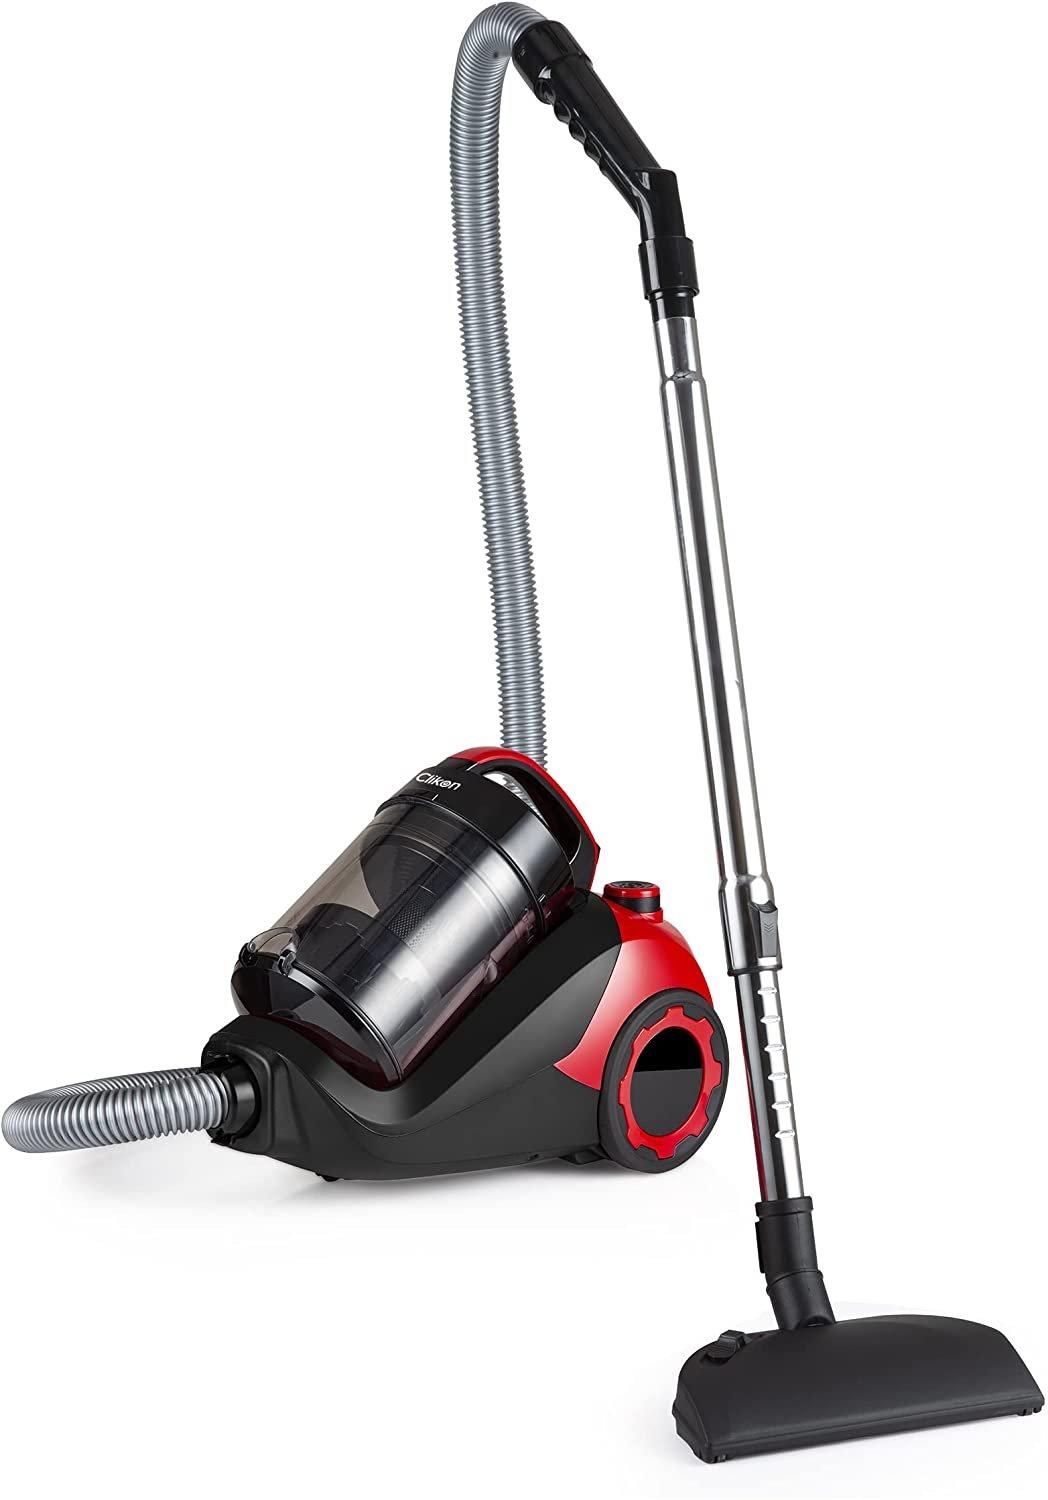 Clikon Vacuum Cleaner Dry Bagless 2000W, 2.5L, Red/Black - eXtra Bahrain